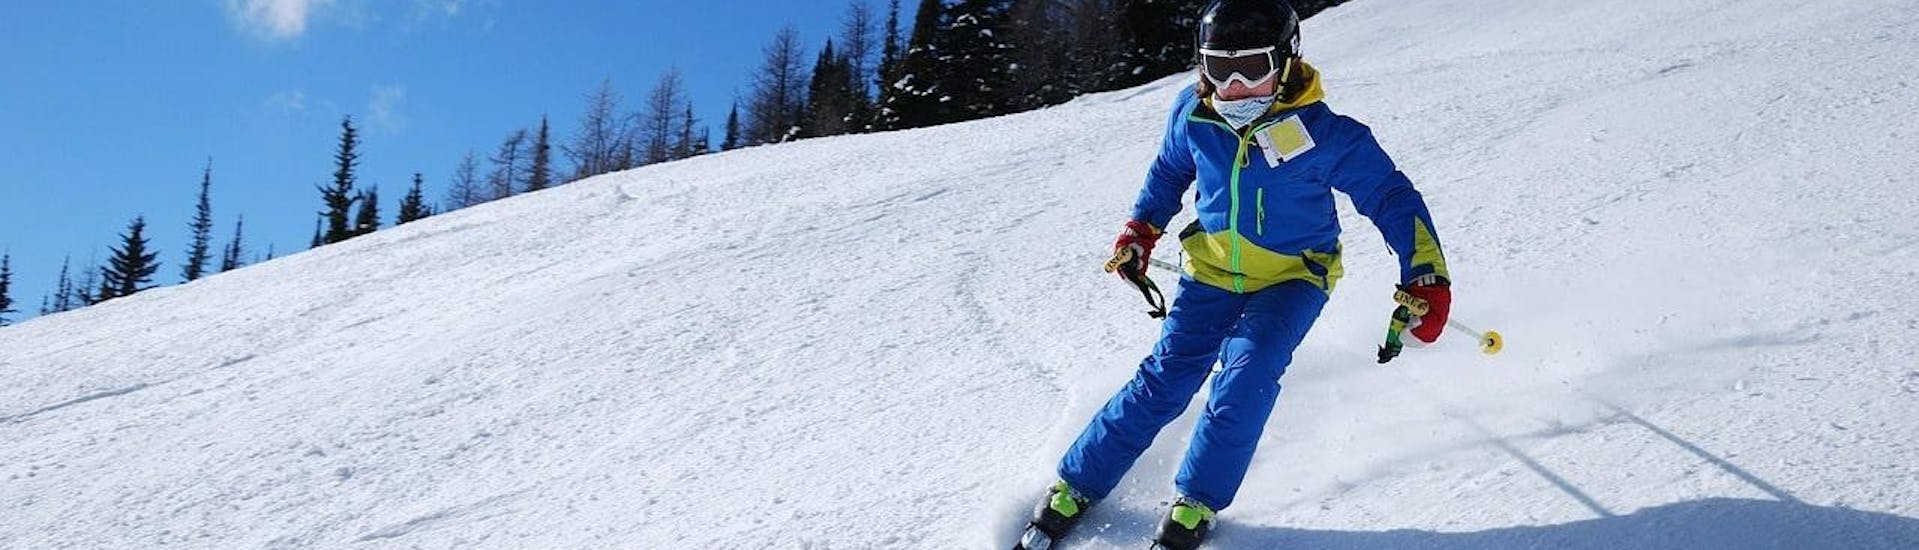 A skier is skiing down a slope with confidence during their Private Ski Lessons for Kids - Holidays with the ski school Moonshot La Bresse.